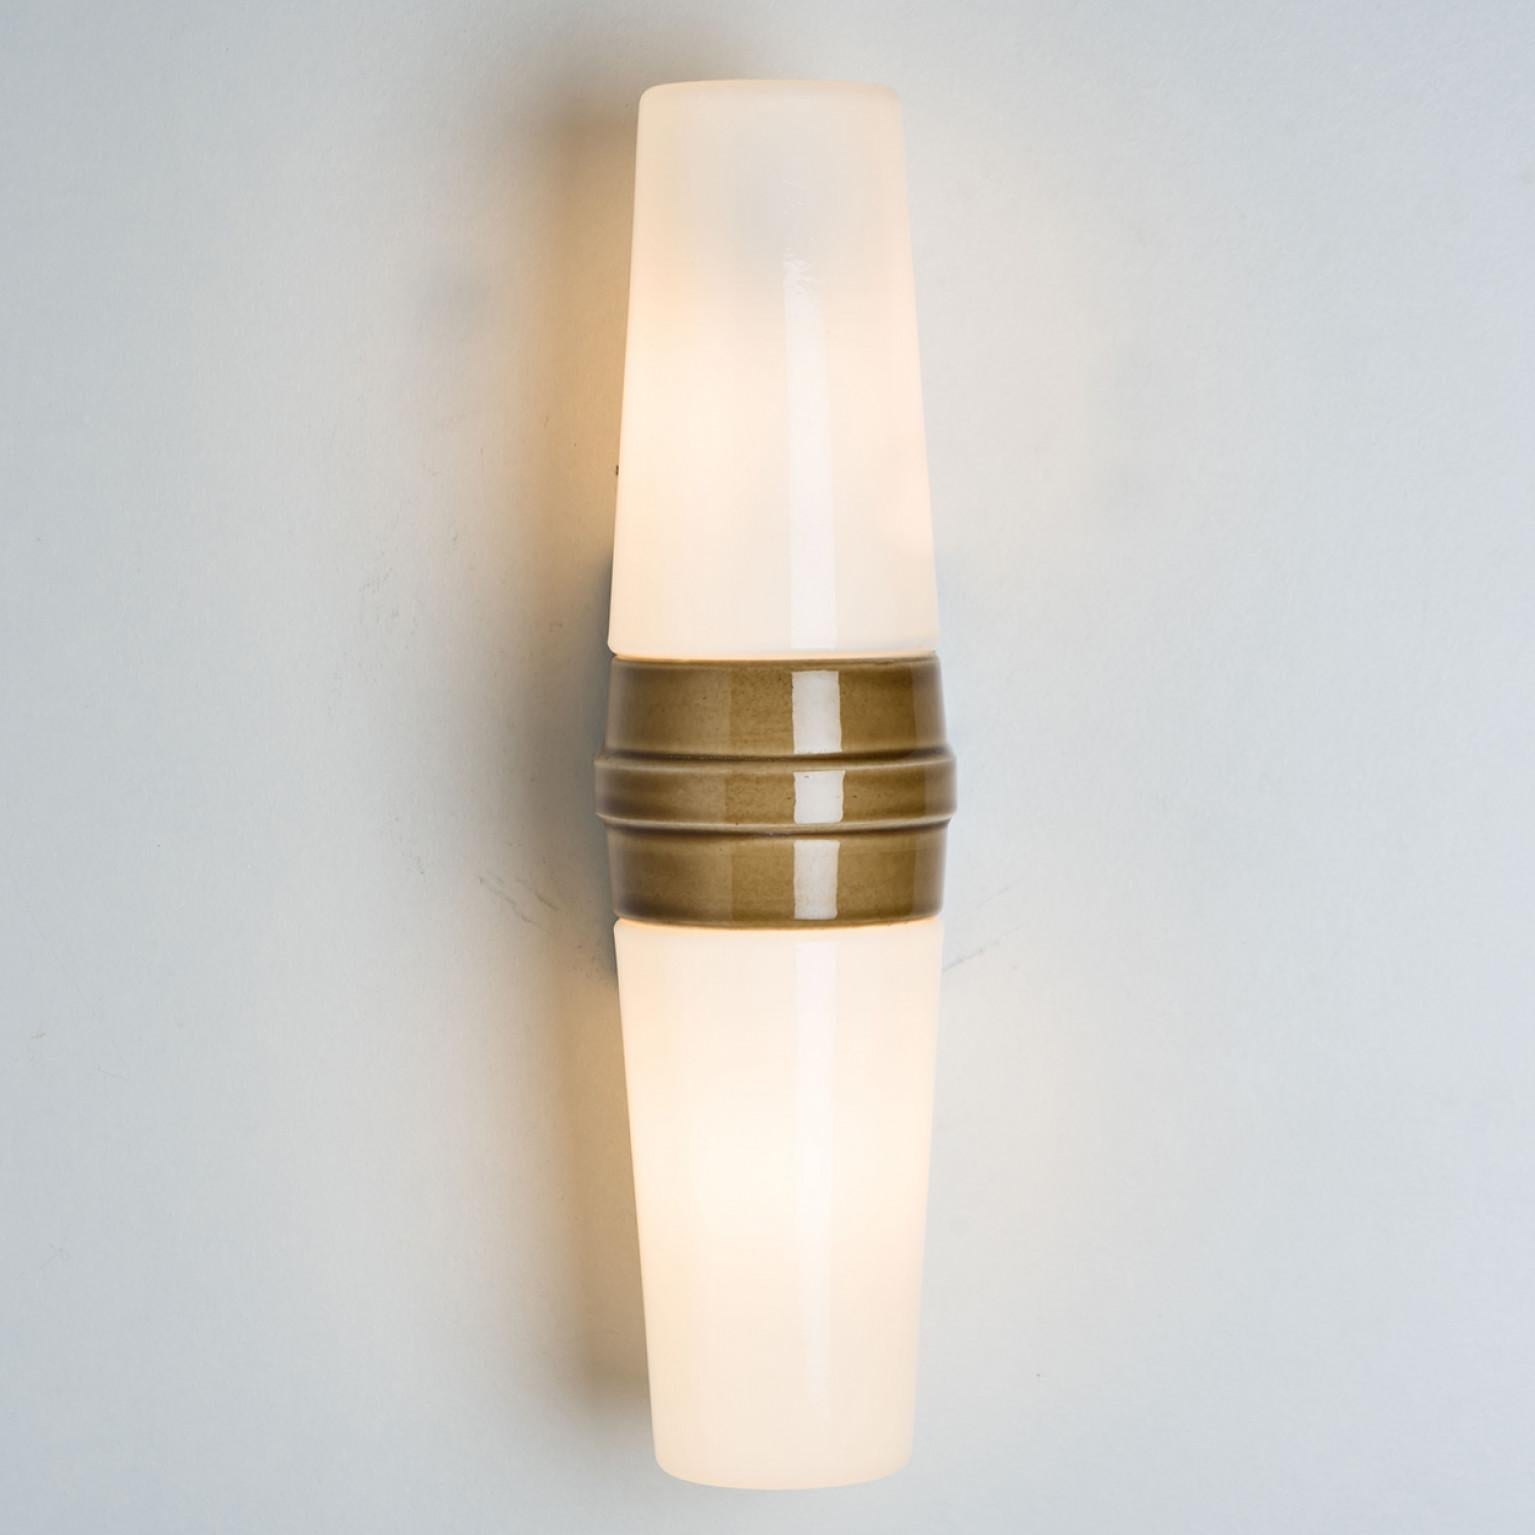 Pair of White and Brown Ceramic Wall Lights, Sweden, 1970 In Good Condition For Sale In Rijssen, NL